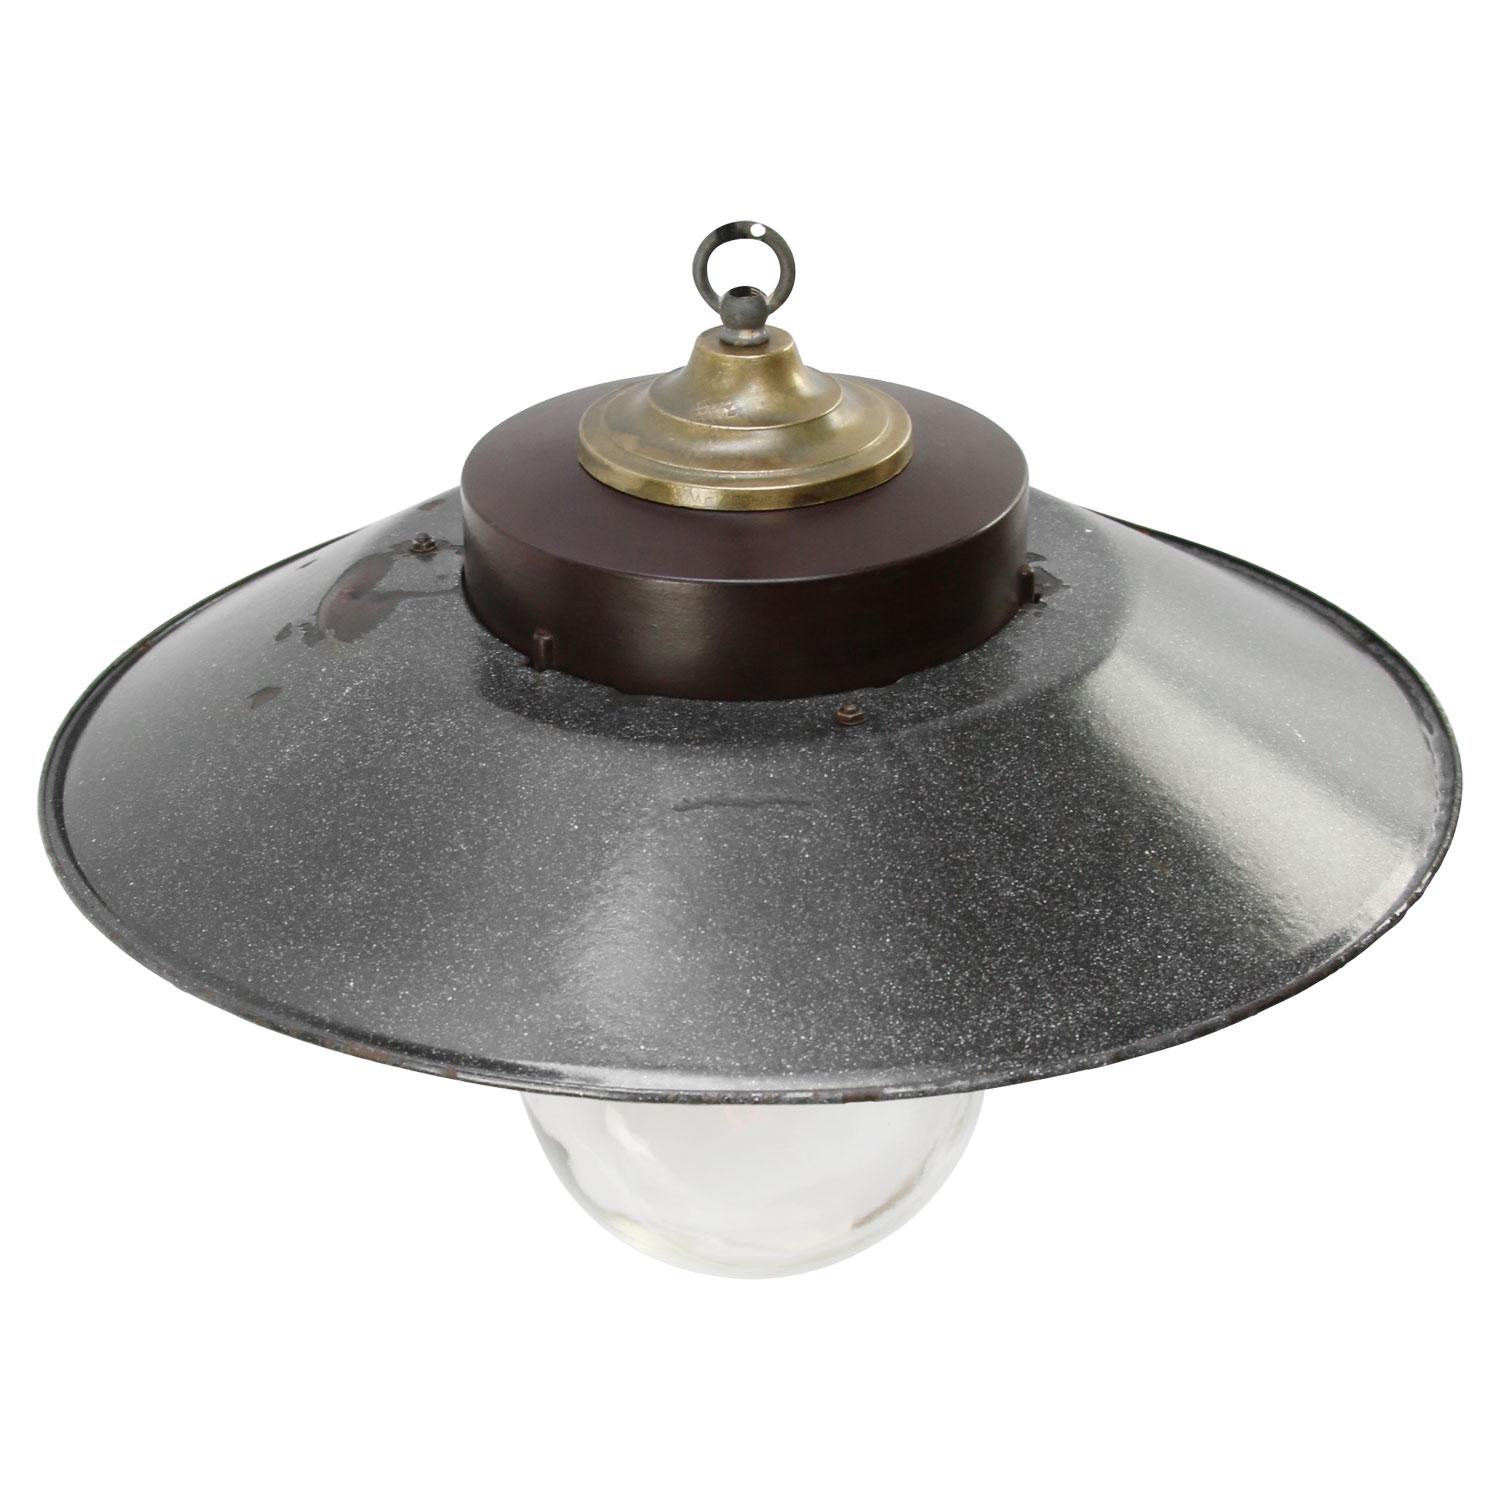 Industrial pendant light. Grey enamel white interior. Bakelite with brass top. Clear glass.

Weight: 3.20 kg / 7.1 lb

Priced per individual item. All lamps have been made suitable by international standards for incandescent light bulbs,